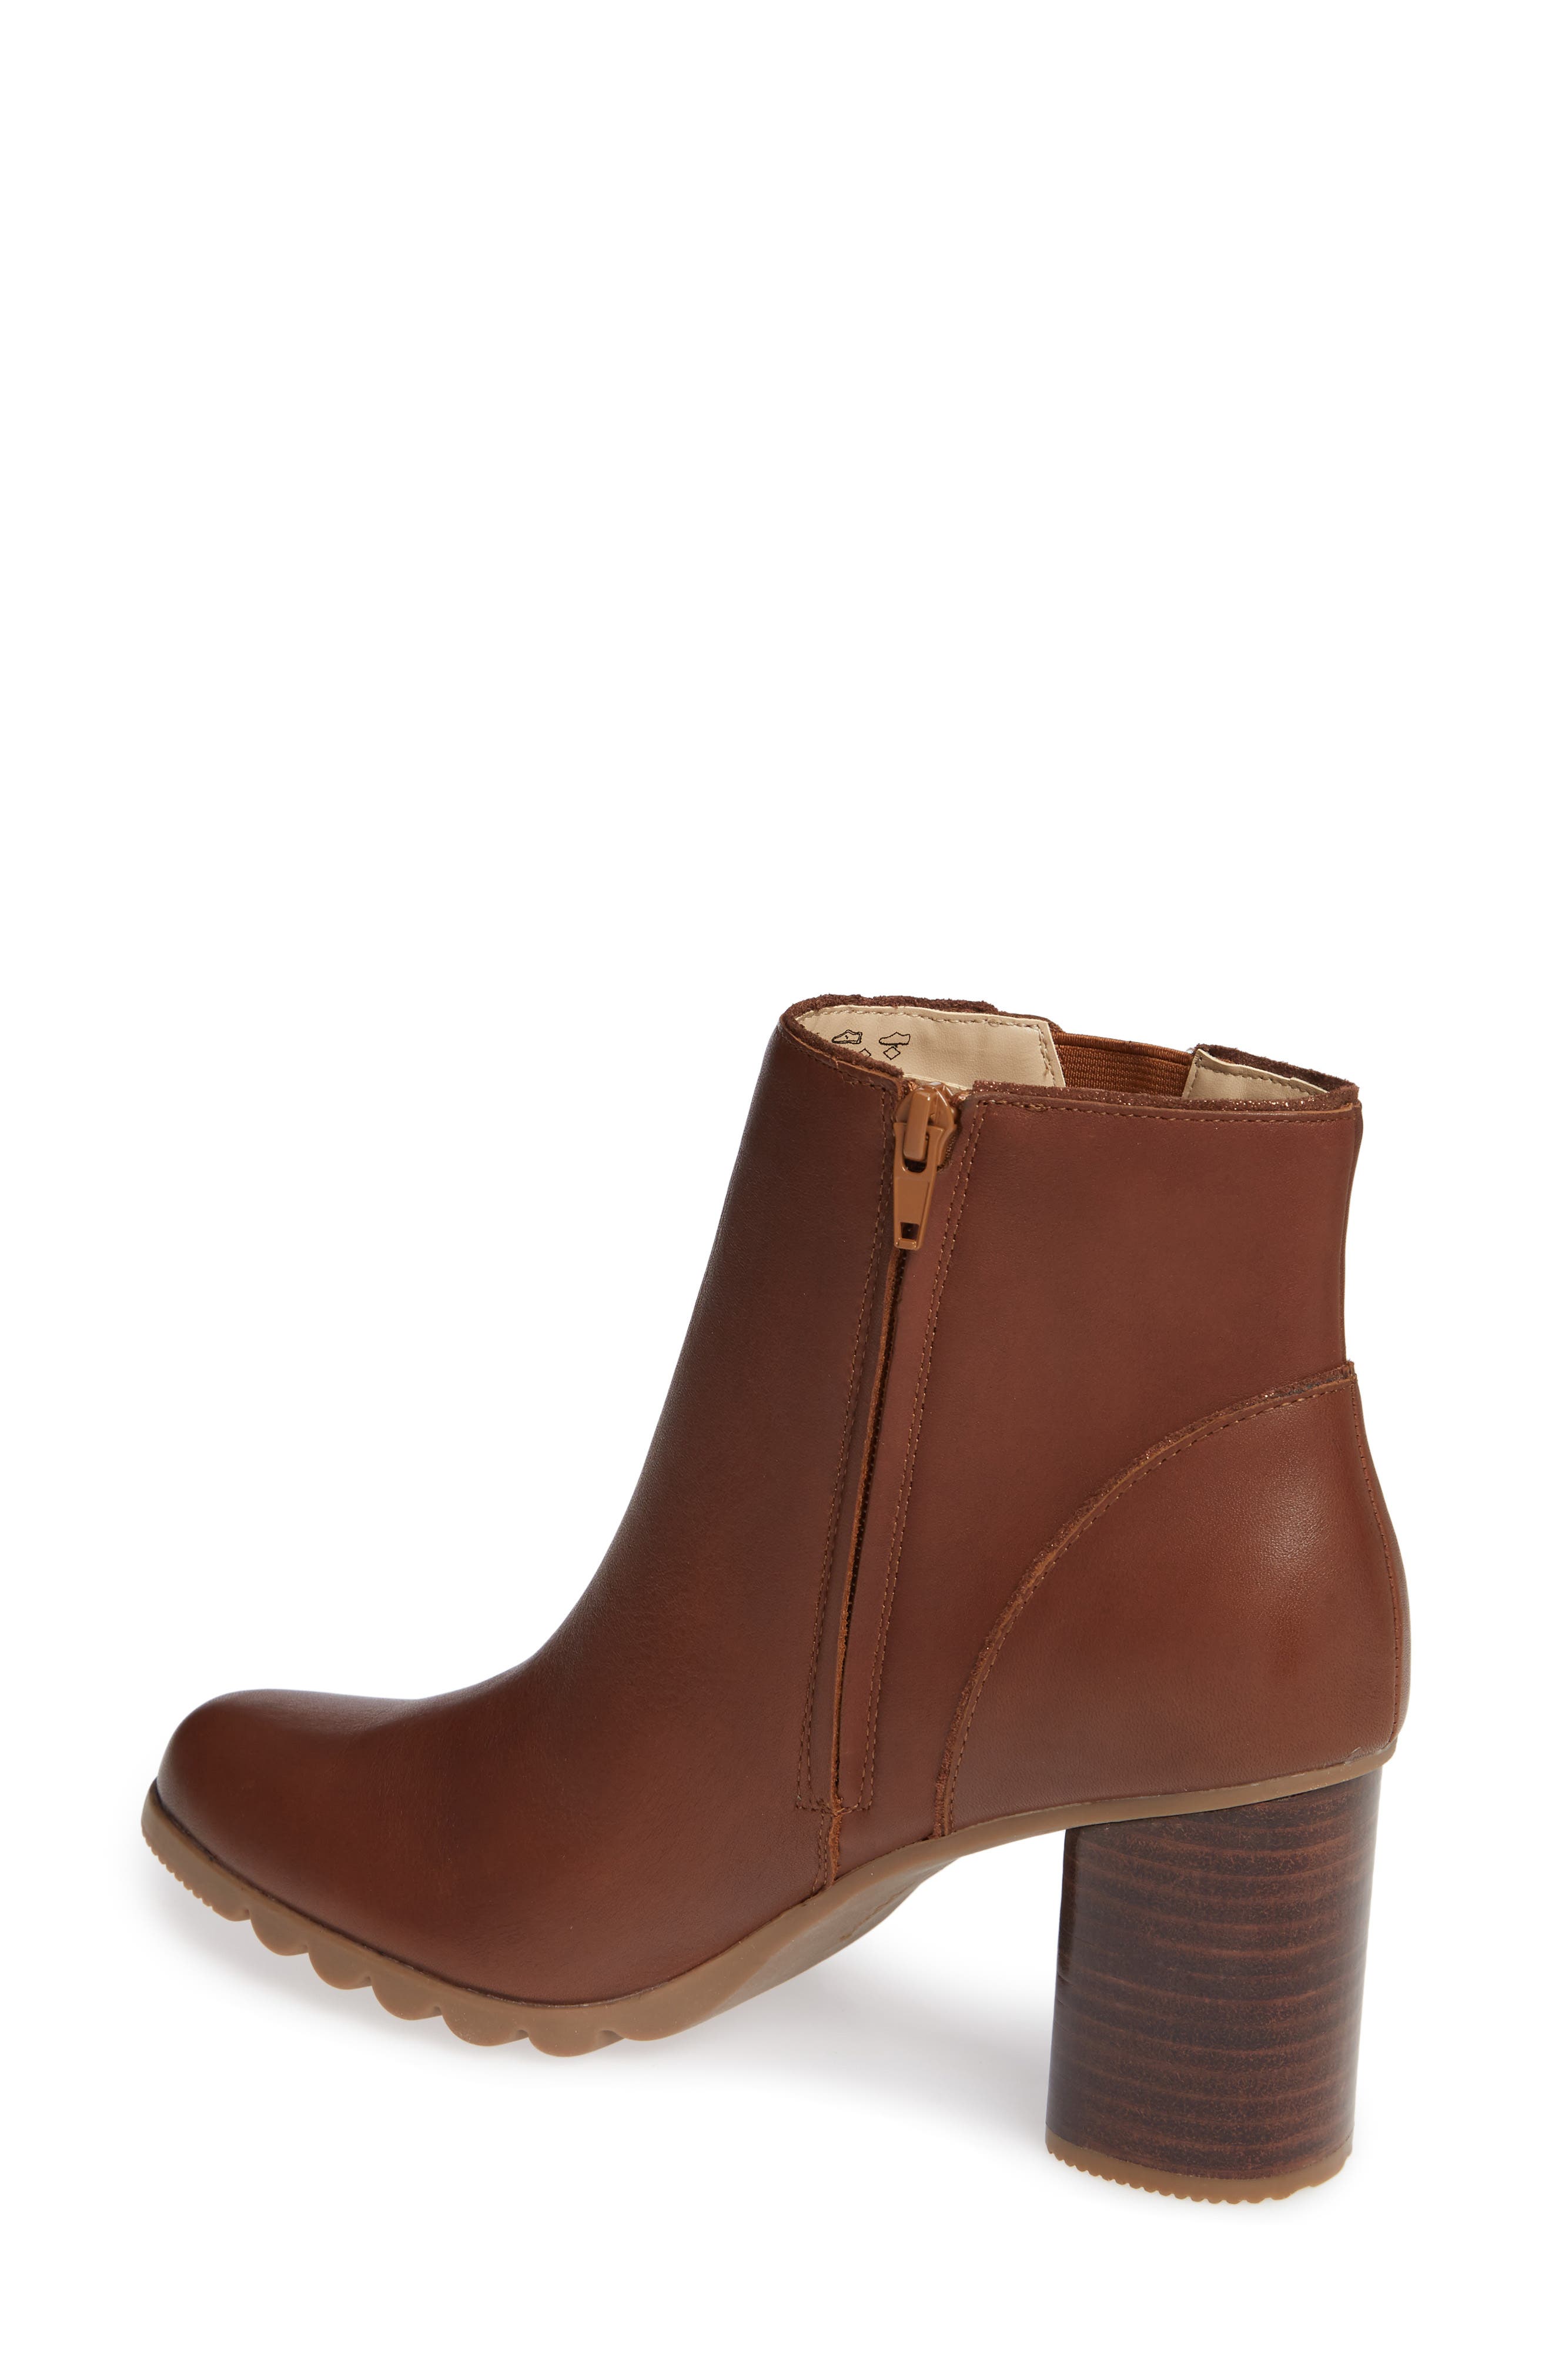 hush puppies spaniel ankle boot